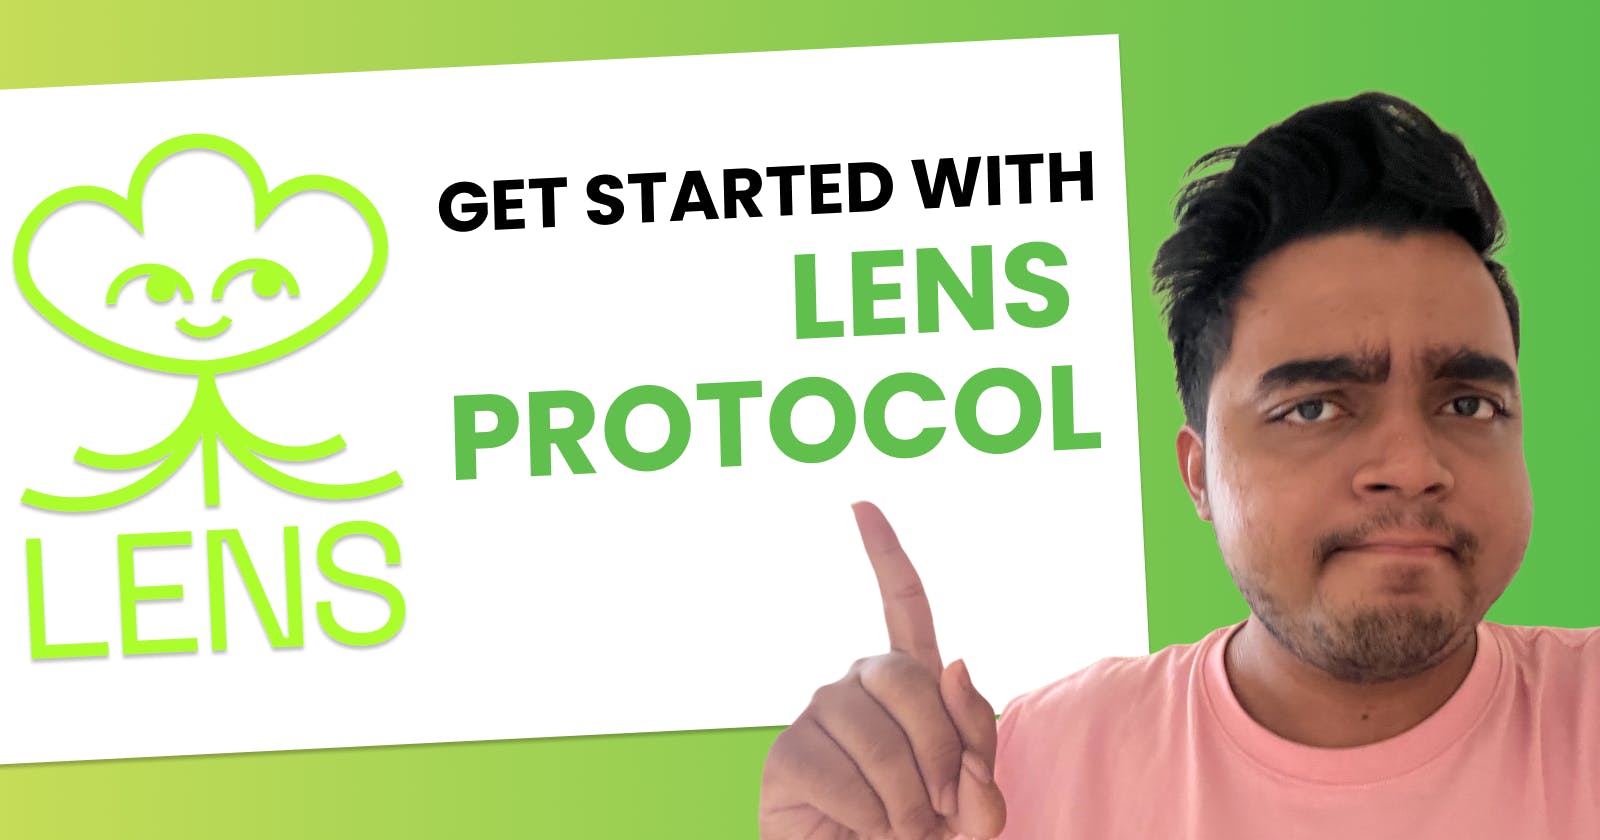 Getting Started With Lens Protocol As A Frontend Developer